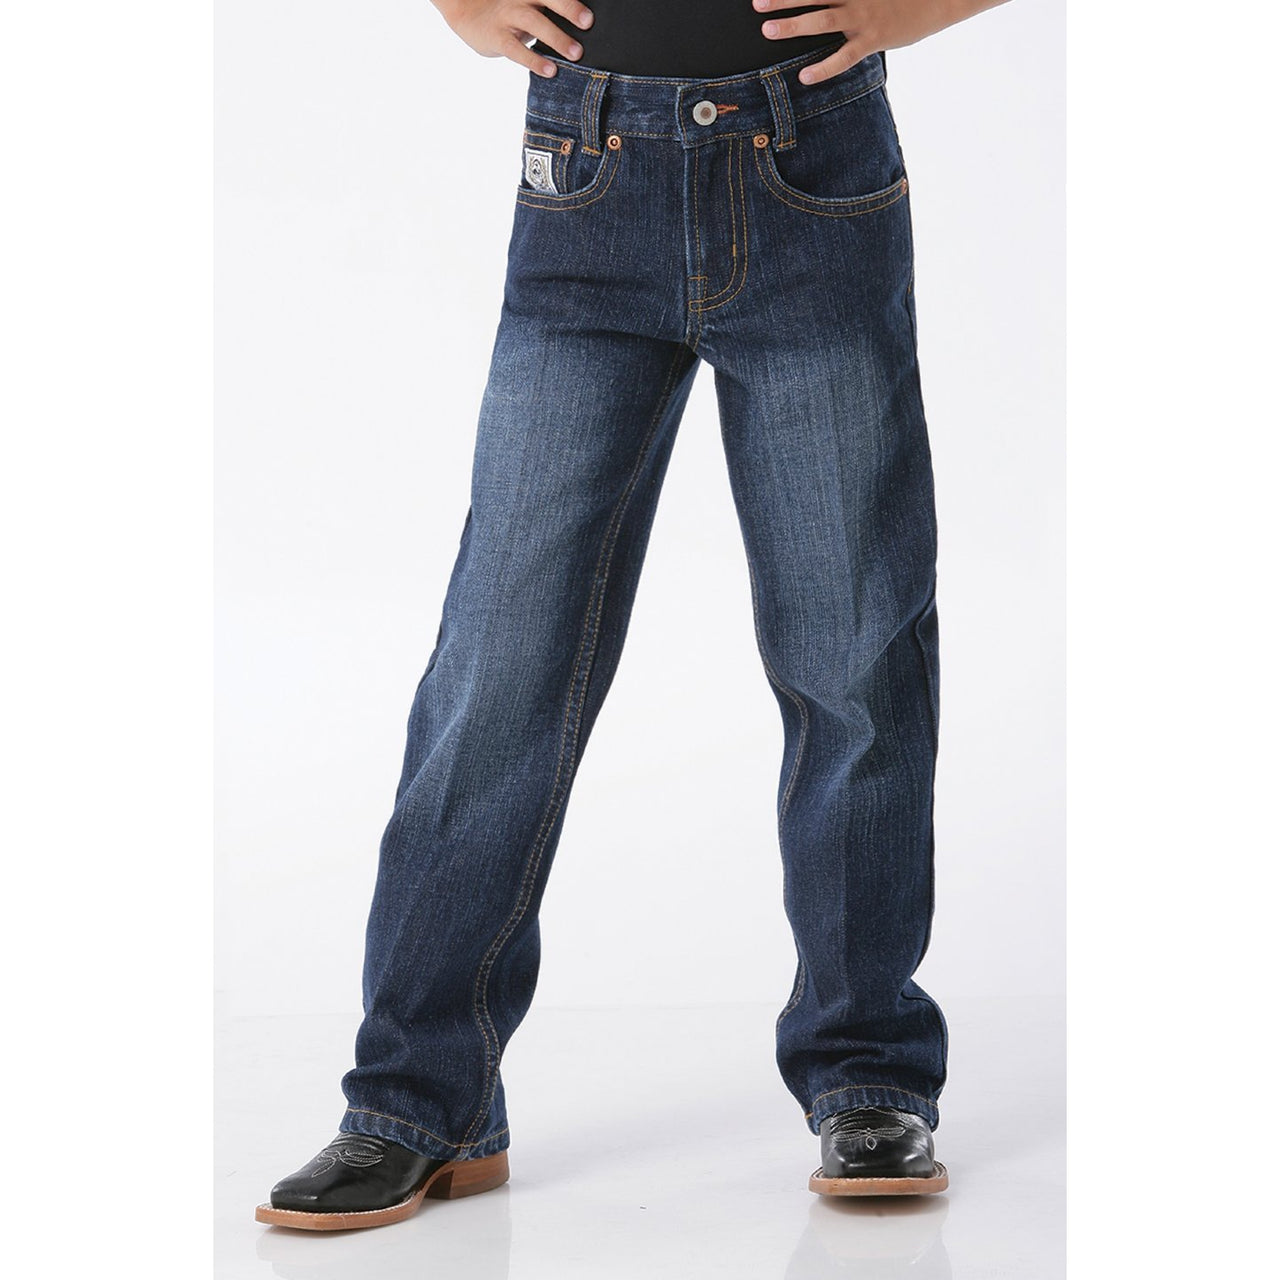 Cinch Men's White Label Performance Dark Relaxed Straight Jeans